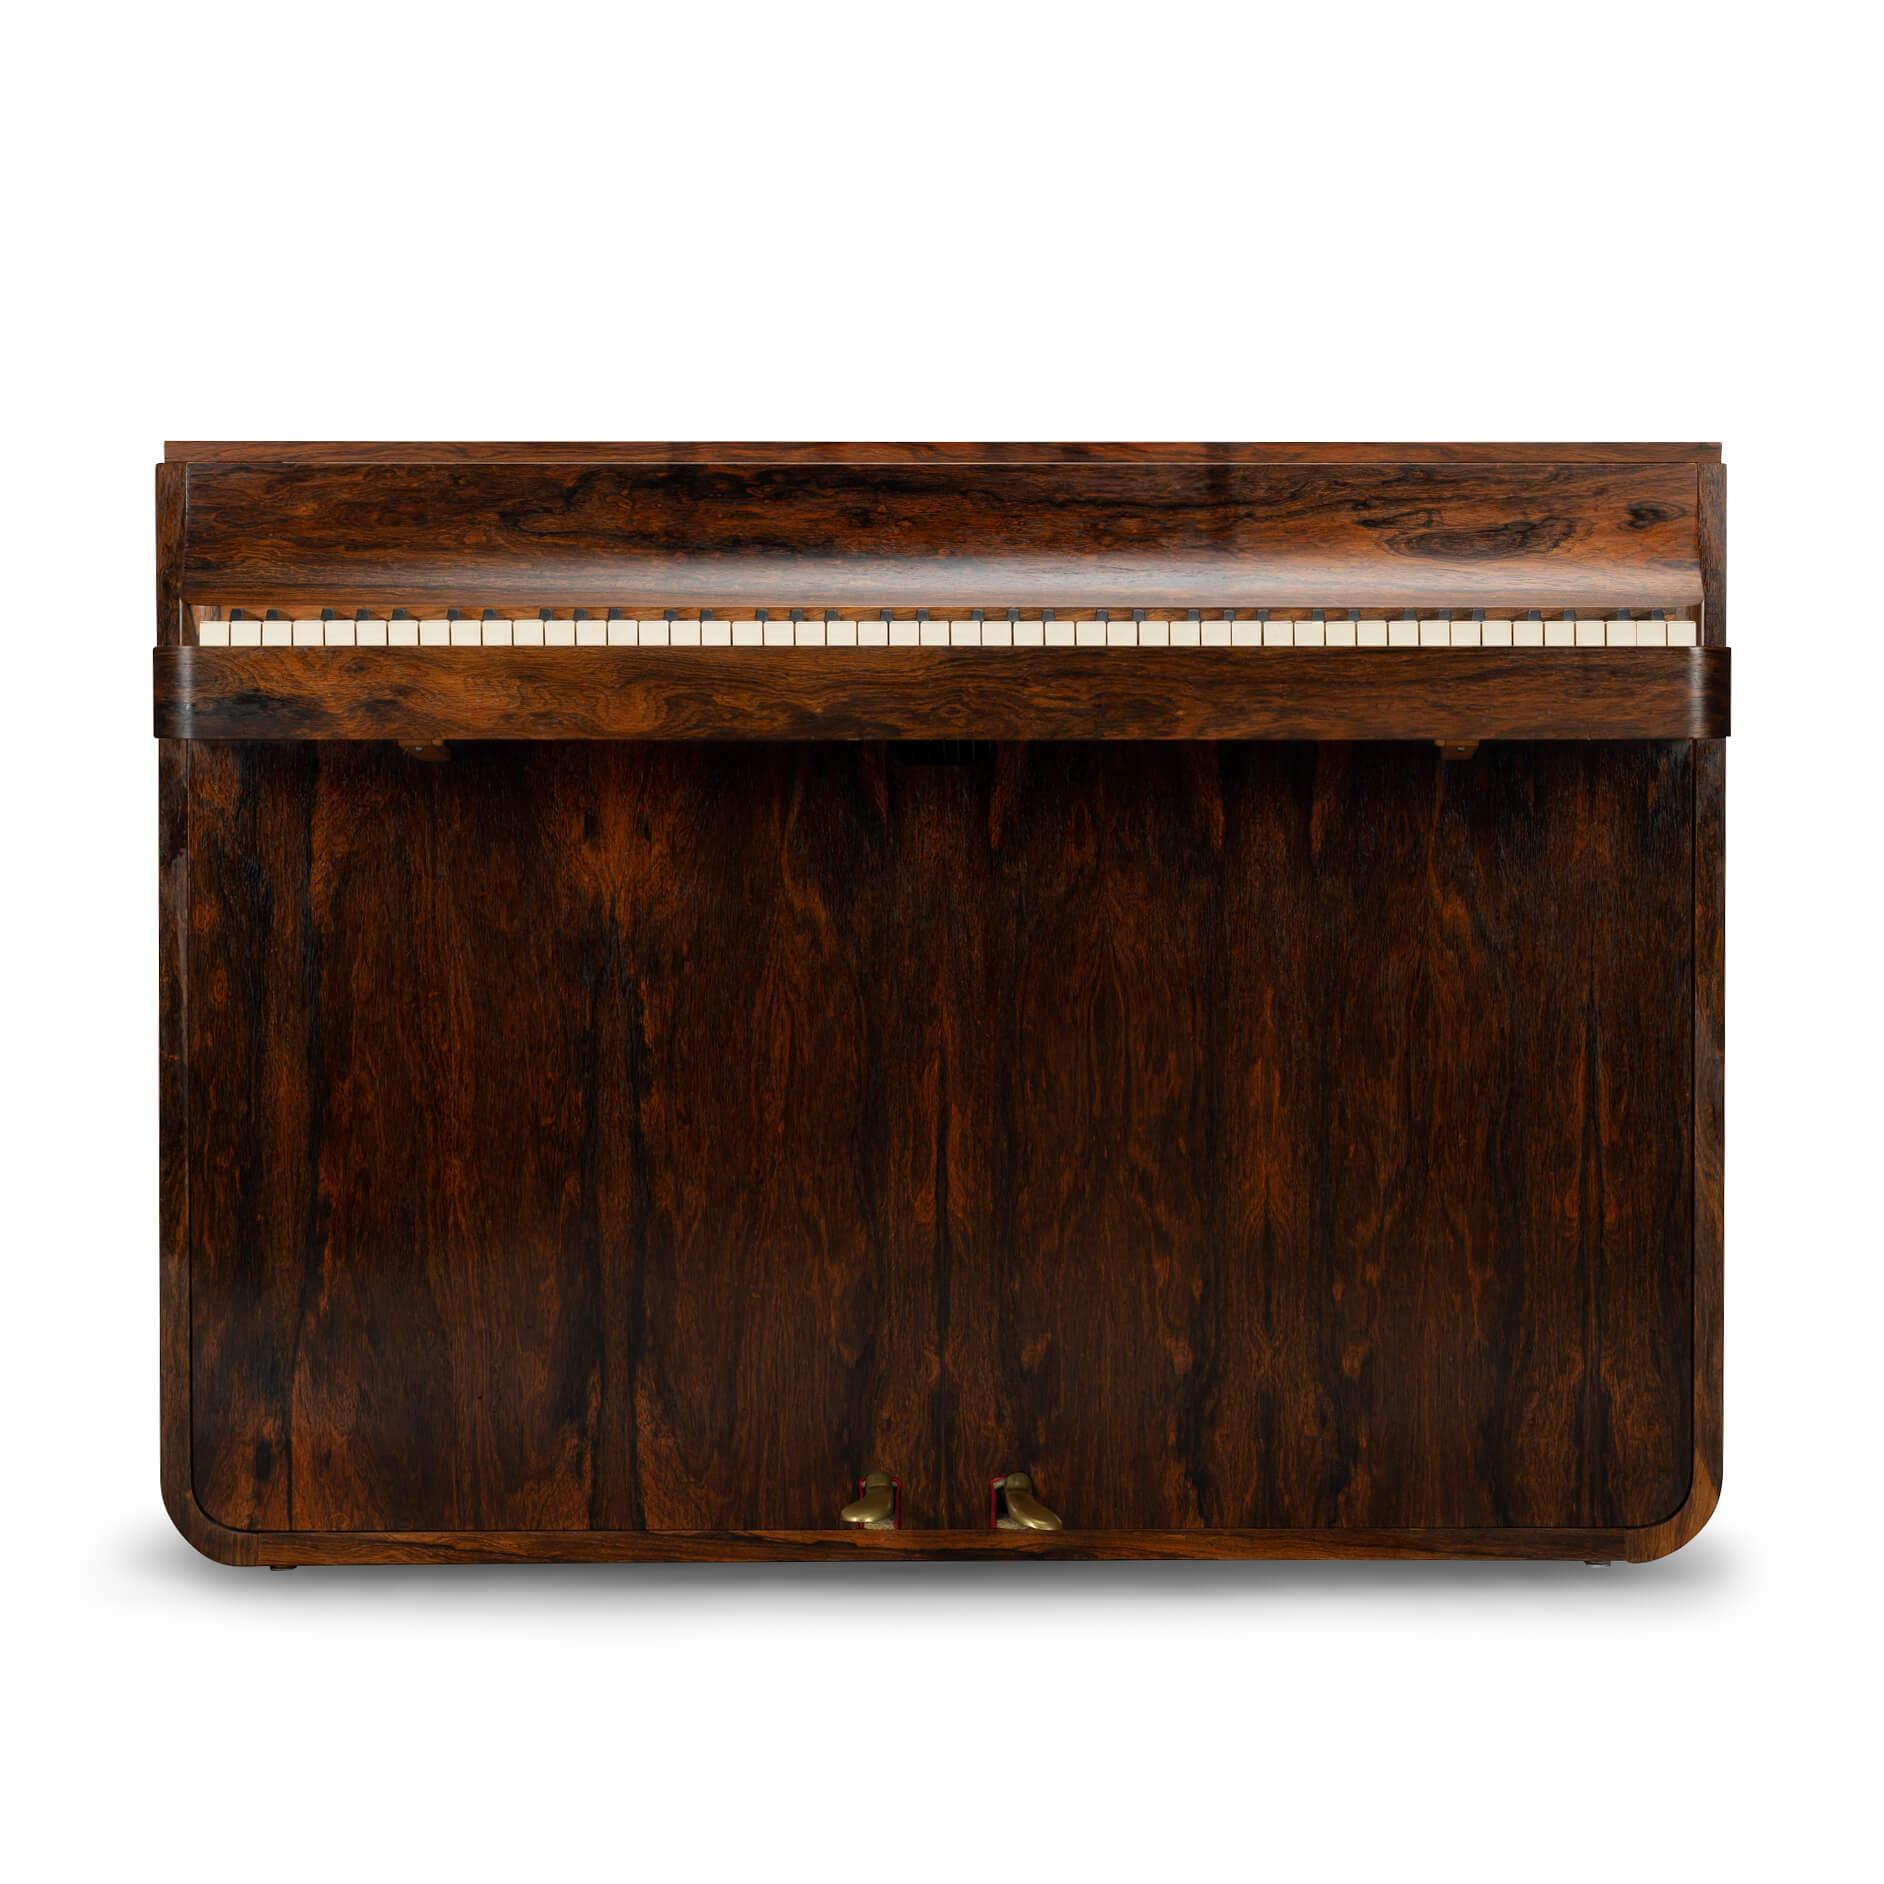 Danish design
A rare Danish midcentury pianette made of magnificent rosewood. It is called pianette due to the 82 keys rather than the standard 88 of a full size piano. This pianette is made by renowned piano maker Louis Zwicki. Every piano from